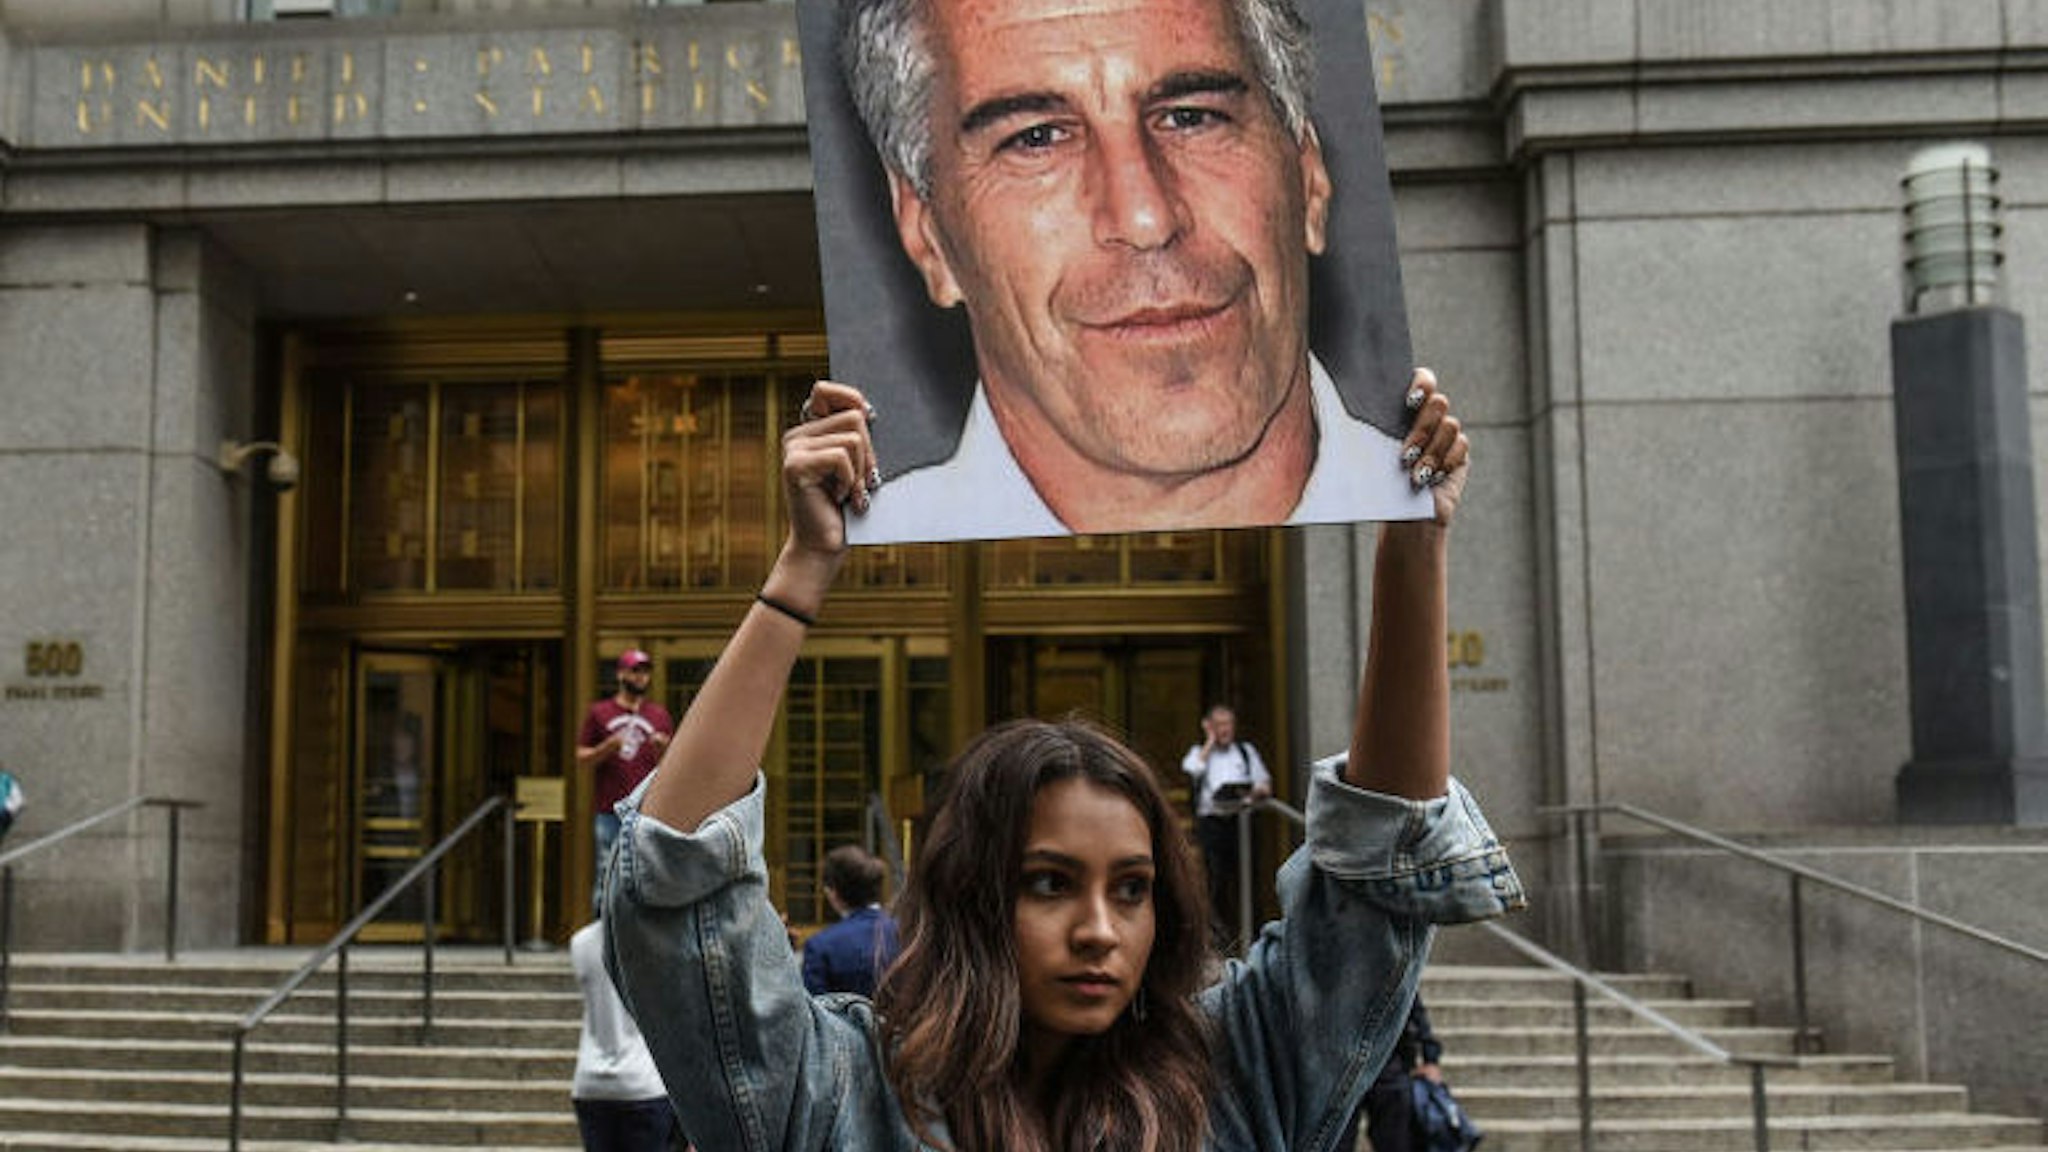 NEW YORK, NY - JULY 08: A protest group called "Hot Mess" hold up signs of Jeffrey Epstein in front of the federal courthouse on July 8, 2019 in New York City. According to reports, Epstein will be charged with one count of sex trafficking of minors and one count of conspiracy to engage in sex trafficking of minors.